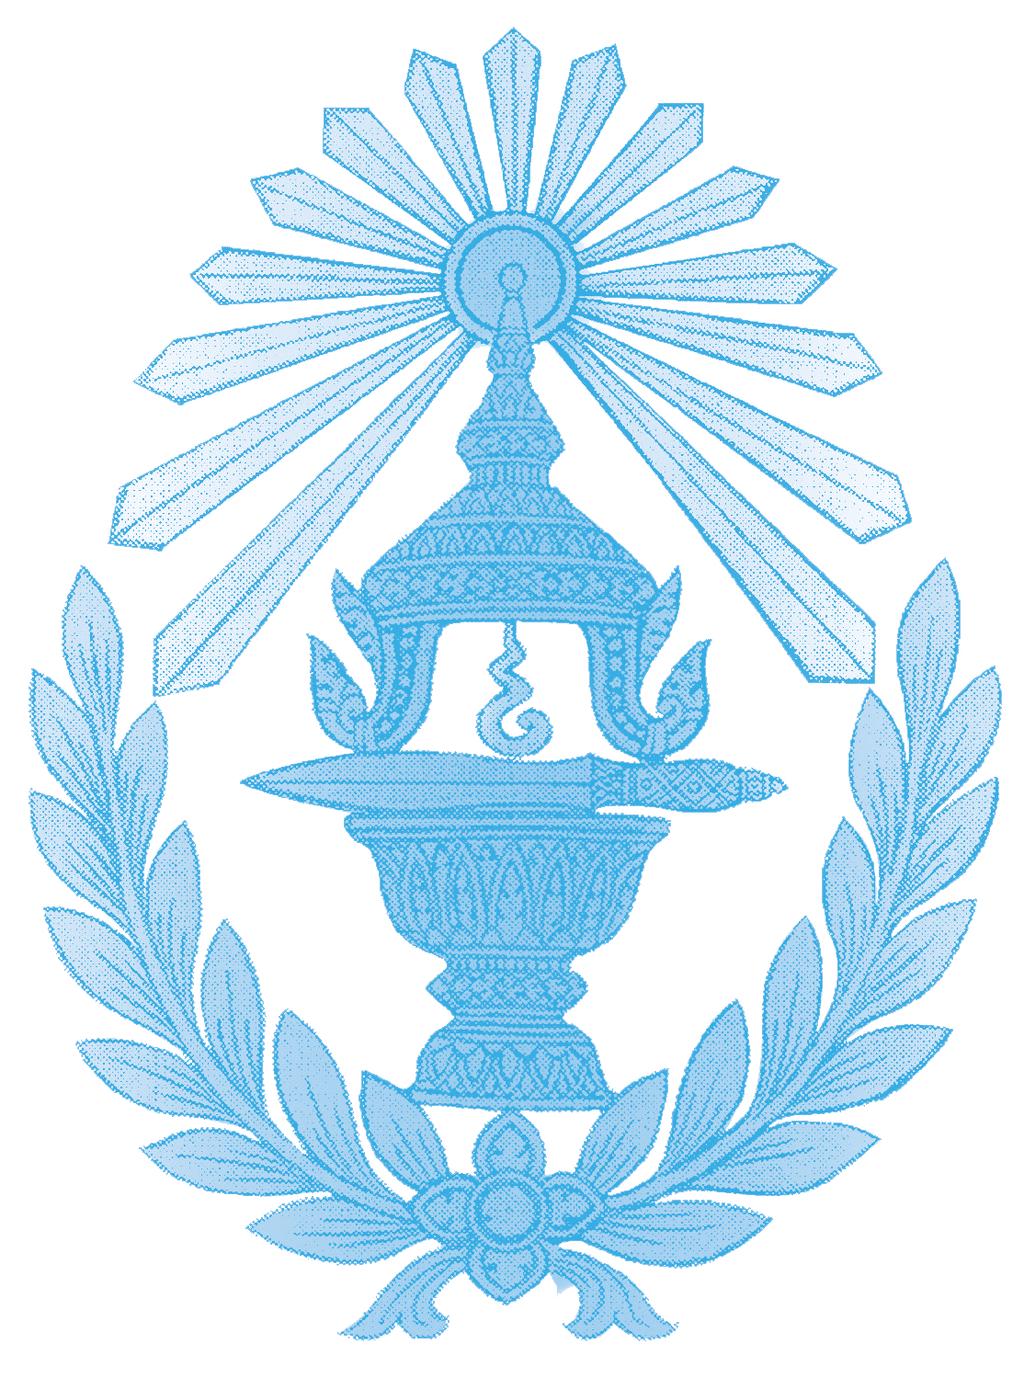 Kingdom of Cambodia Nation Religion King Royal Government of Cambodia Achieving